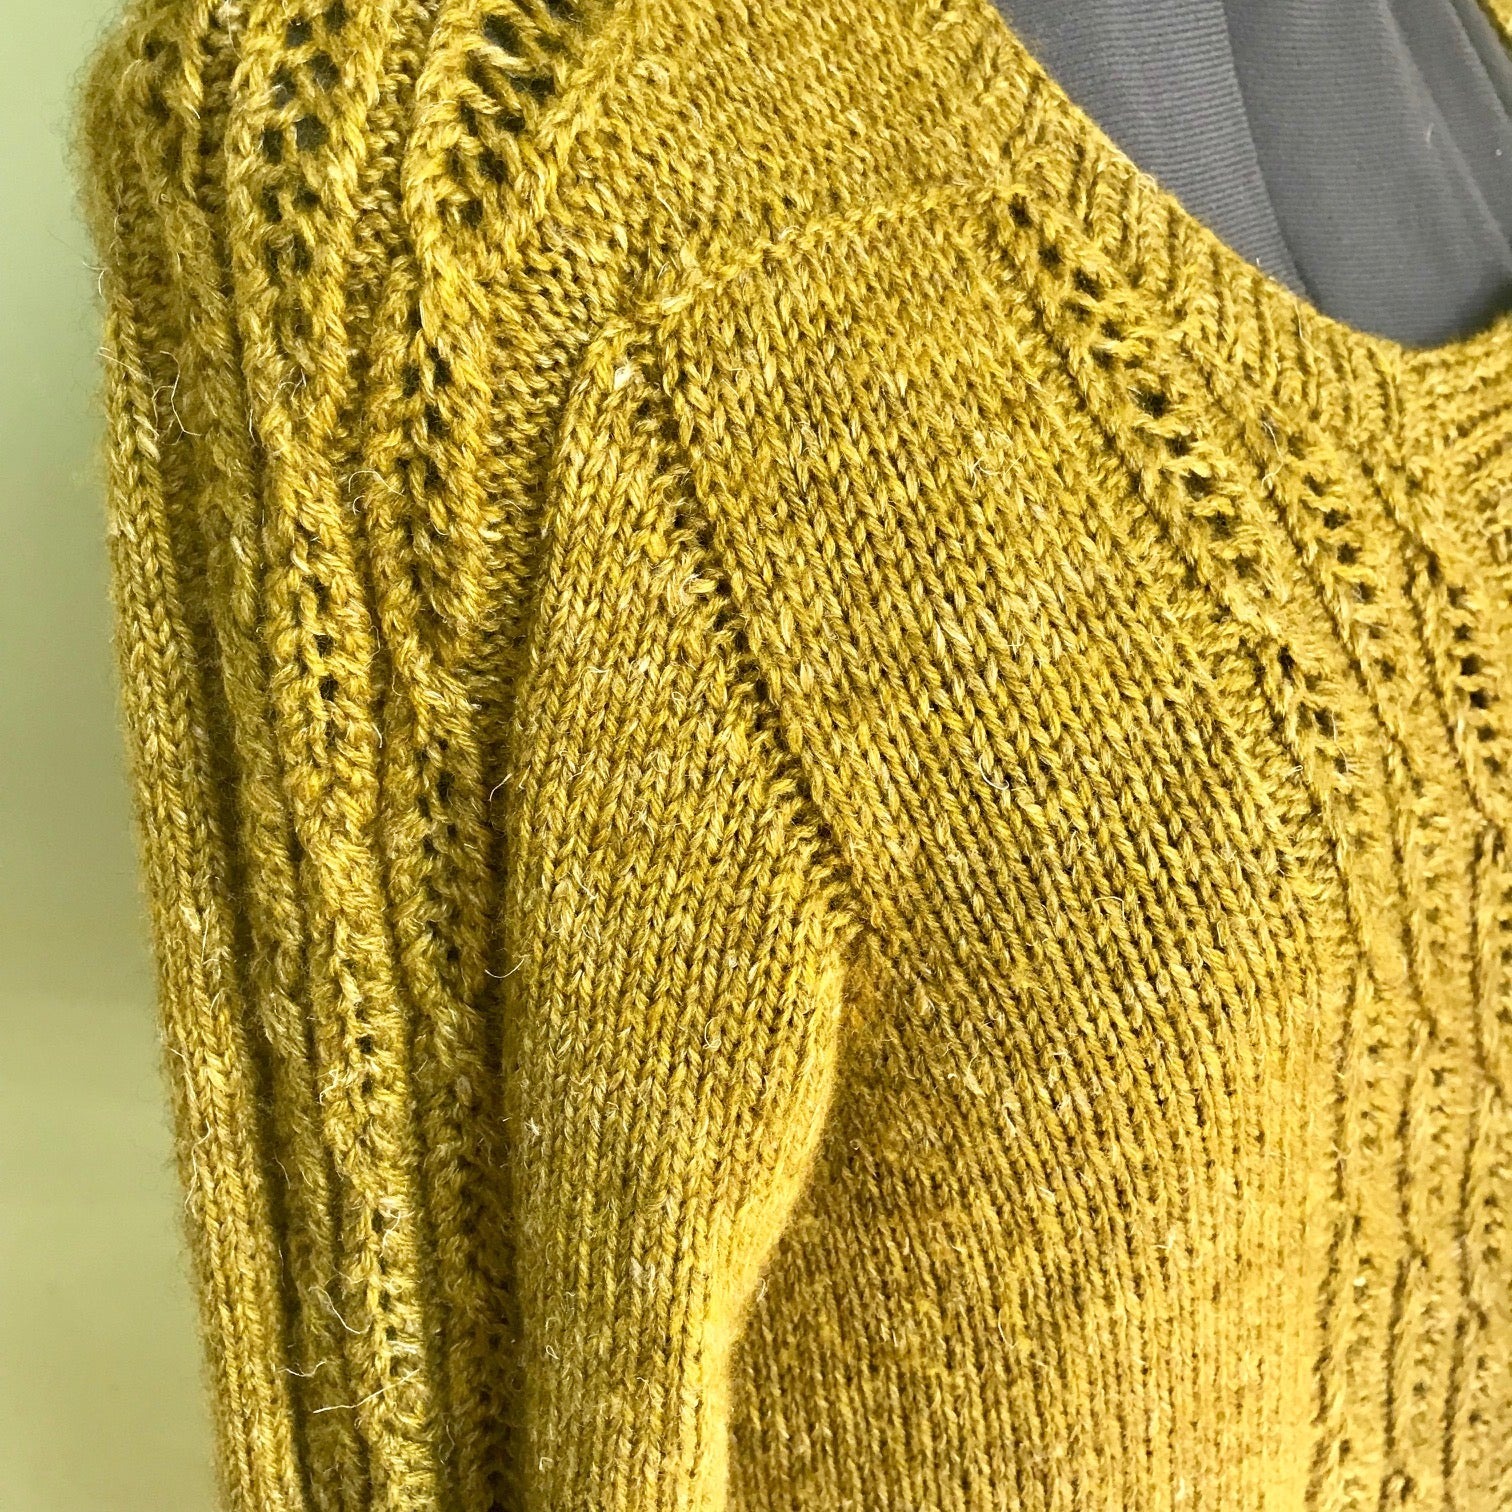 Learn to Knit: Tightening Up Stitches